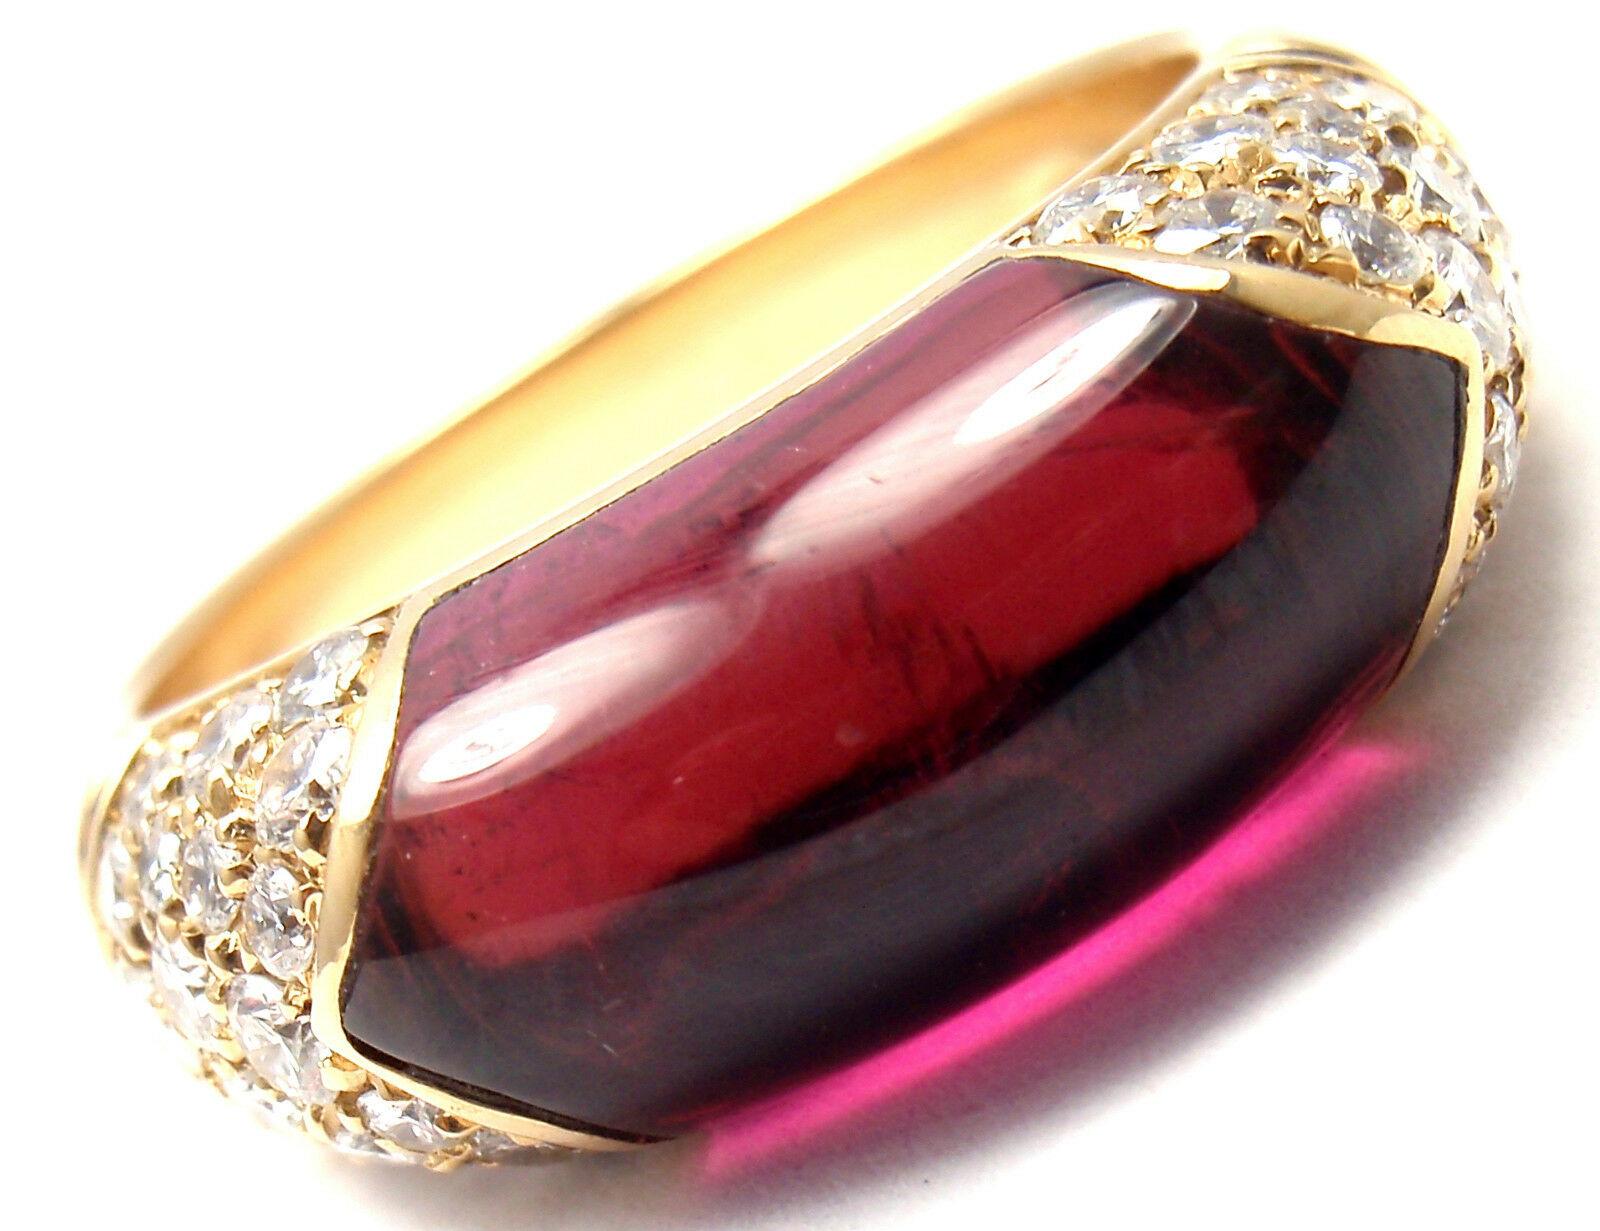 18k Yellow Gold Diamond Pink Tourmaline Ring by Bulgari. 
With 40 round brilliant cut diamonds VS1 clarity, G color total weight approx. .60ct
1 pink tourmaline 15mm x 7mm
This ring comes with original Bvlgari box.
Details:  
Ring Size: 5.5 
Width: 